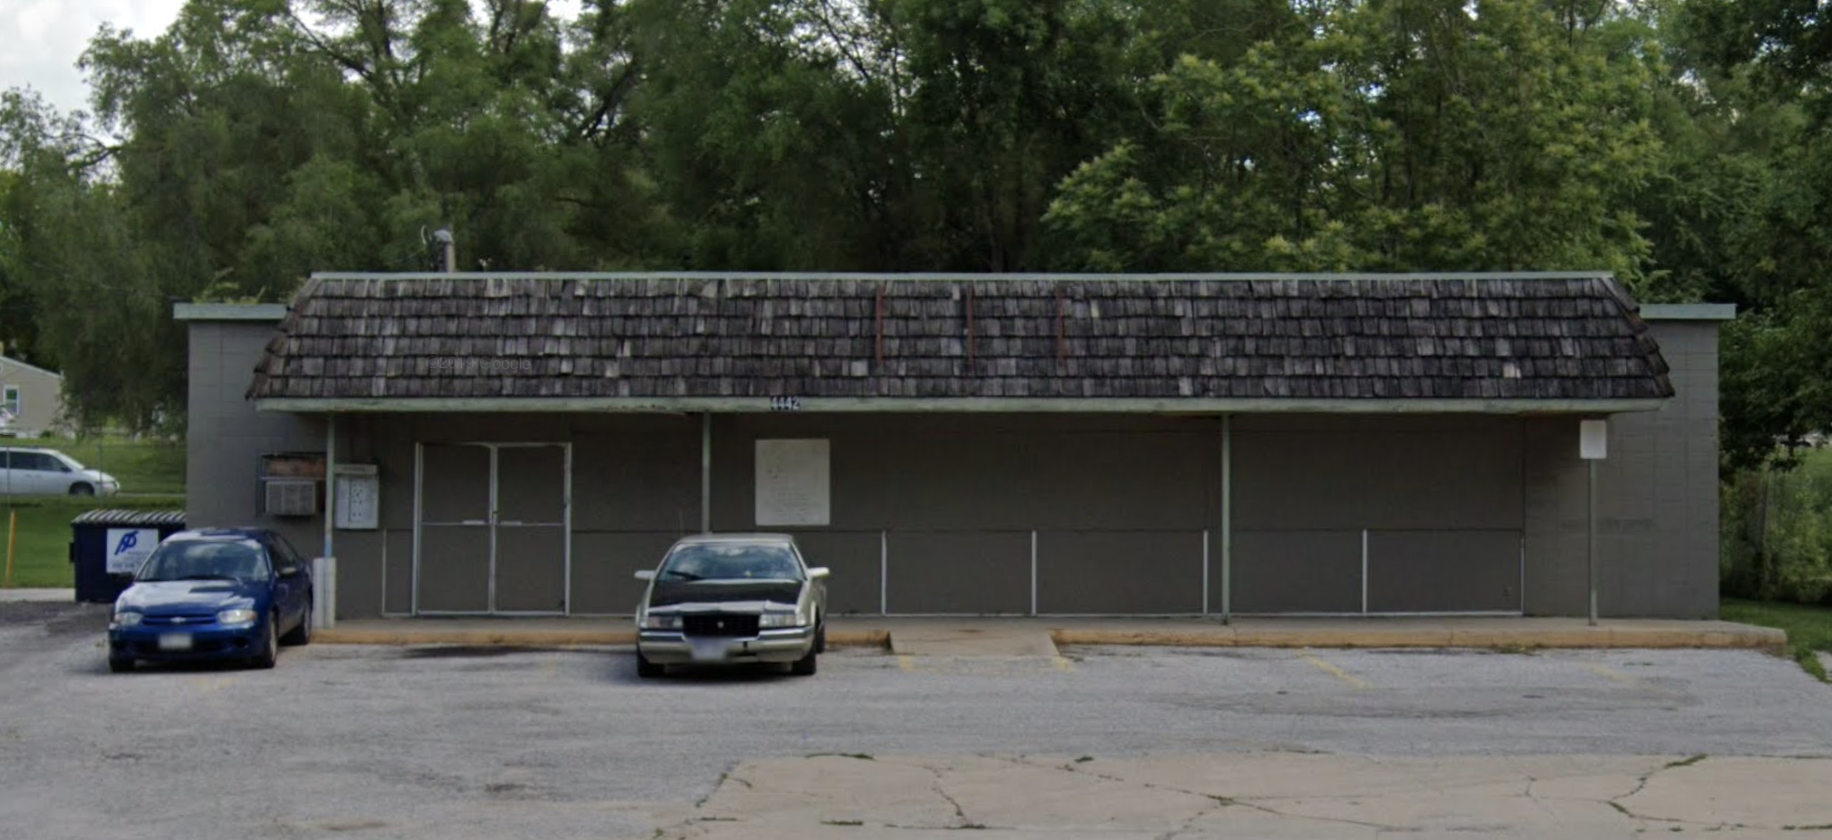 This building at 4222 Redman Avenue in North Omaha, Nebraska, was Kwik Shop #606 from 1971-1982. Today its empty.